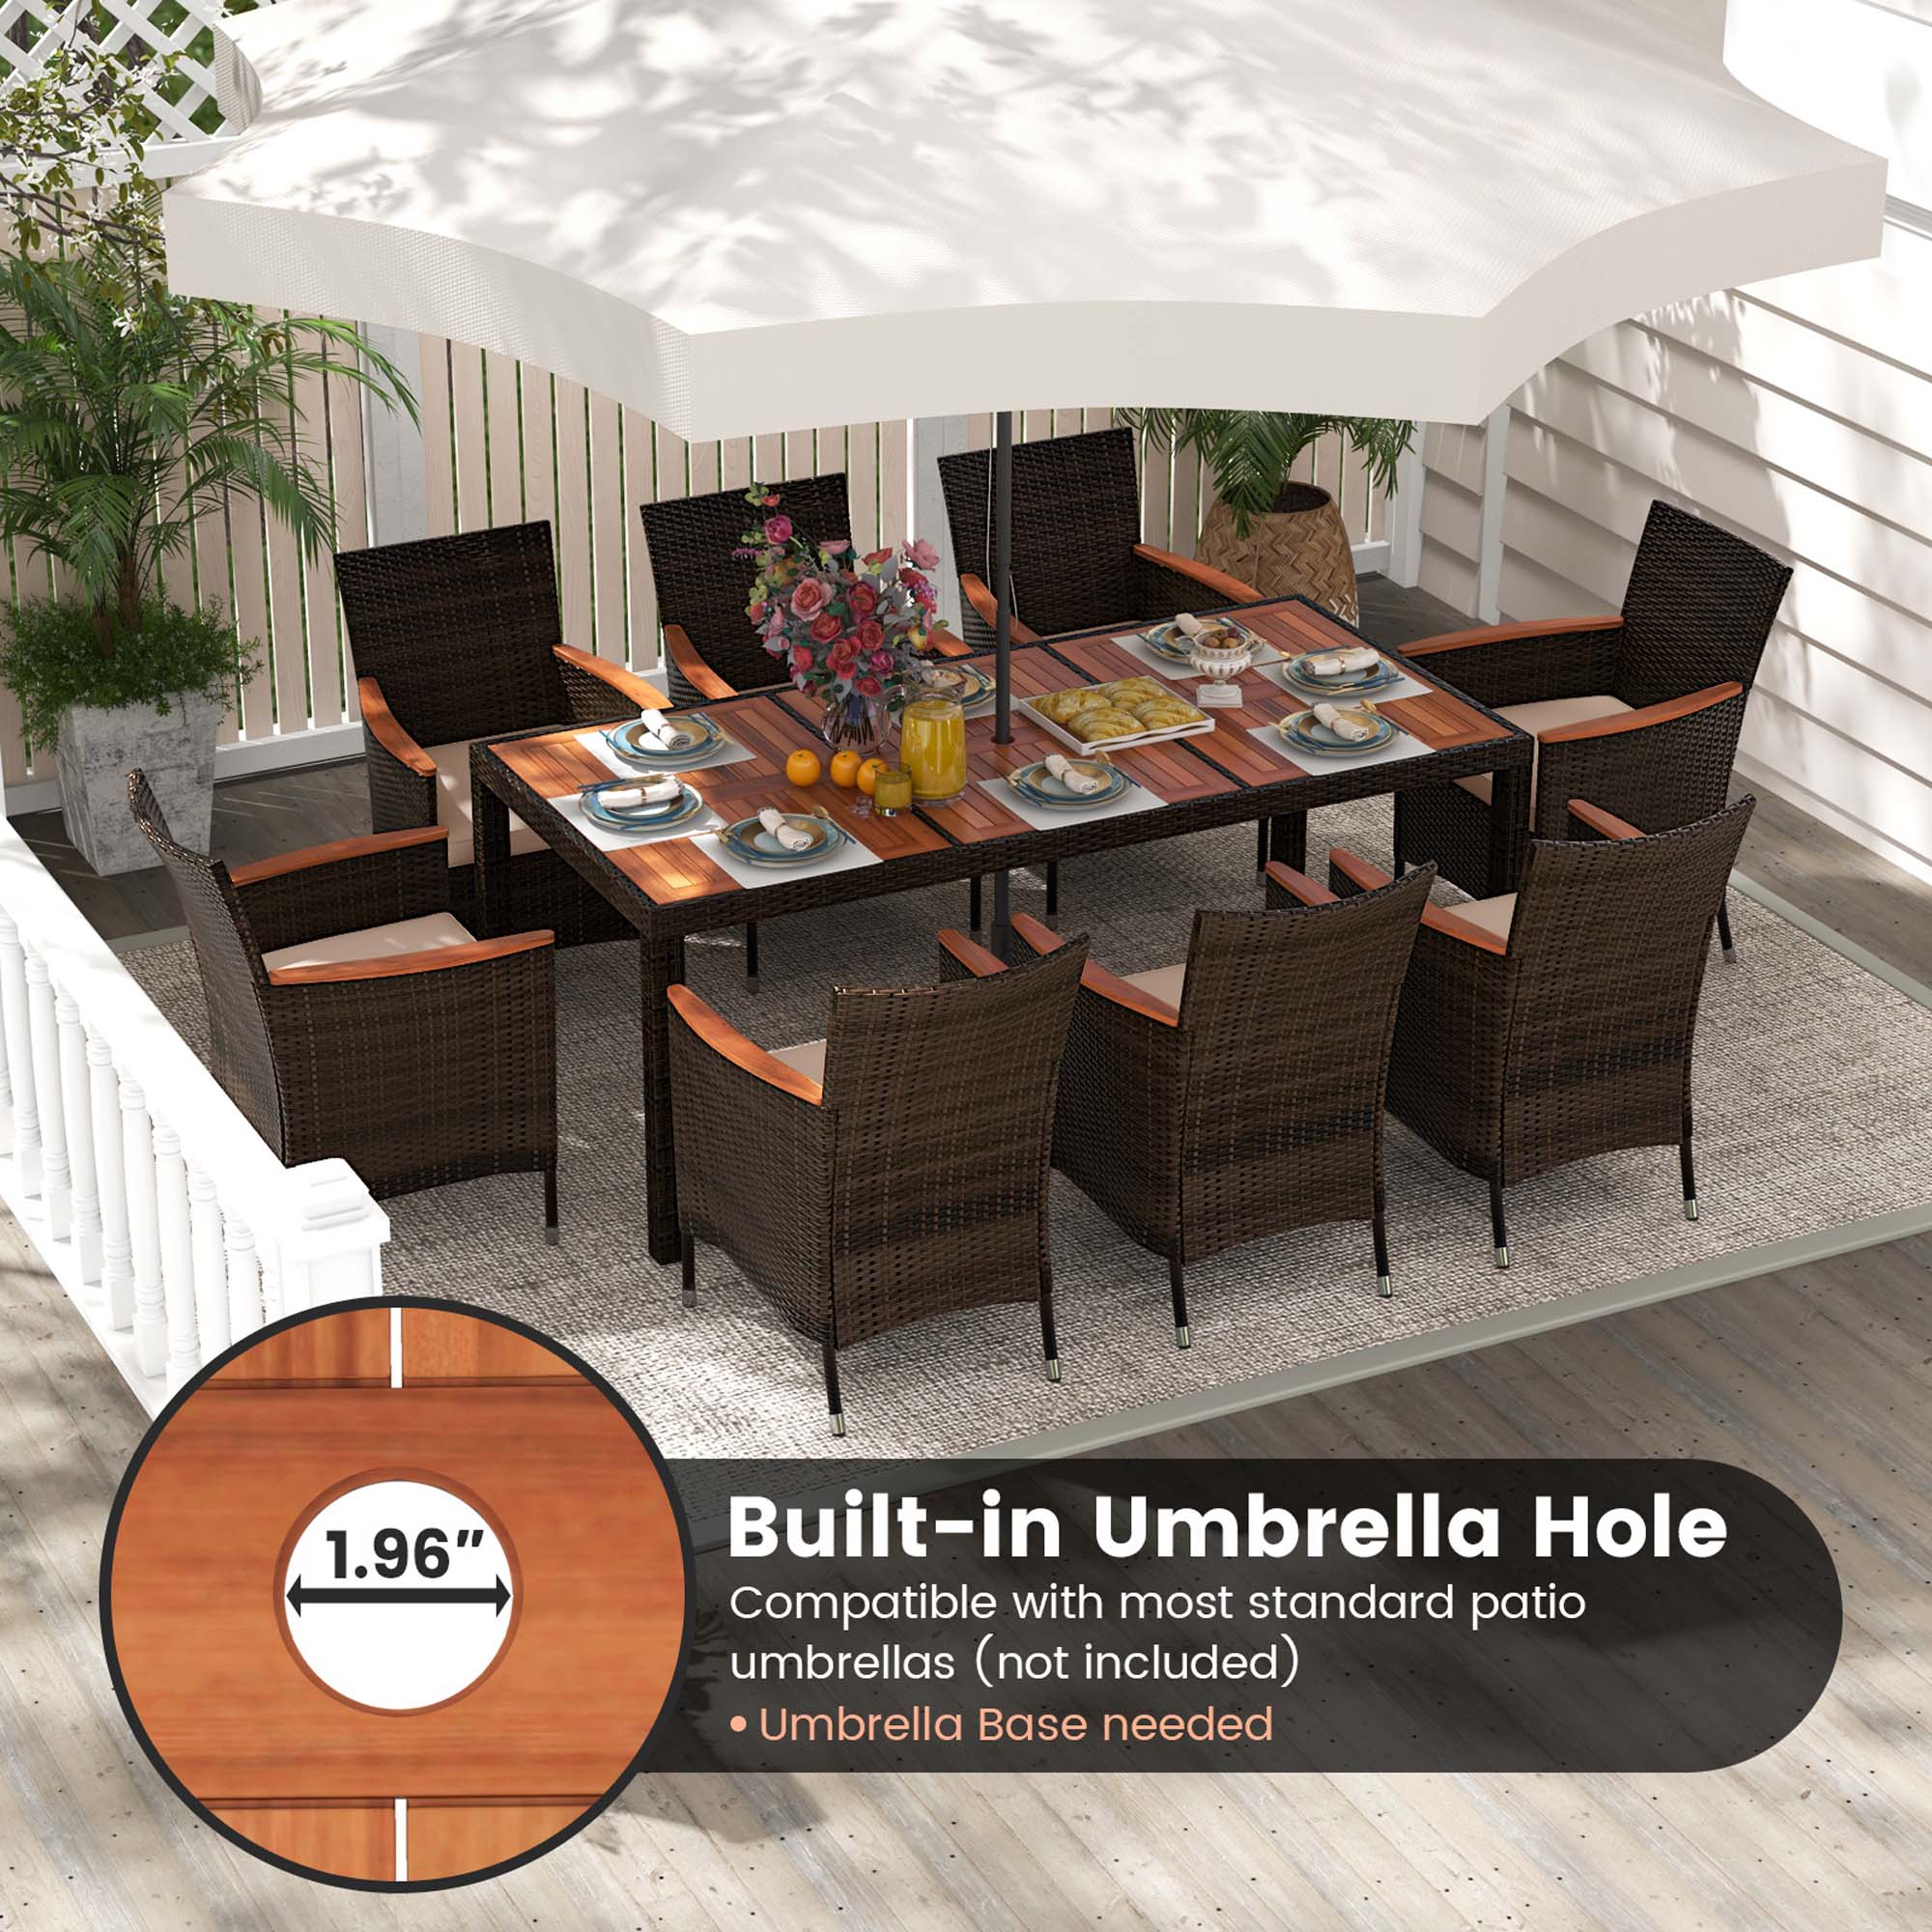 Costway 9PCS Patio Wicker Dining Set Acacia Wood Table Top Umbrella Hole Cushions Chairs - image 5 of 10